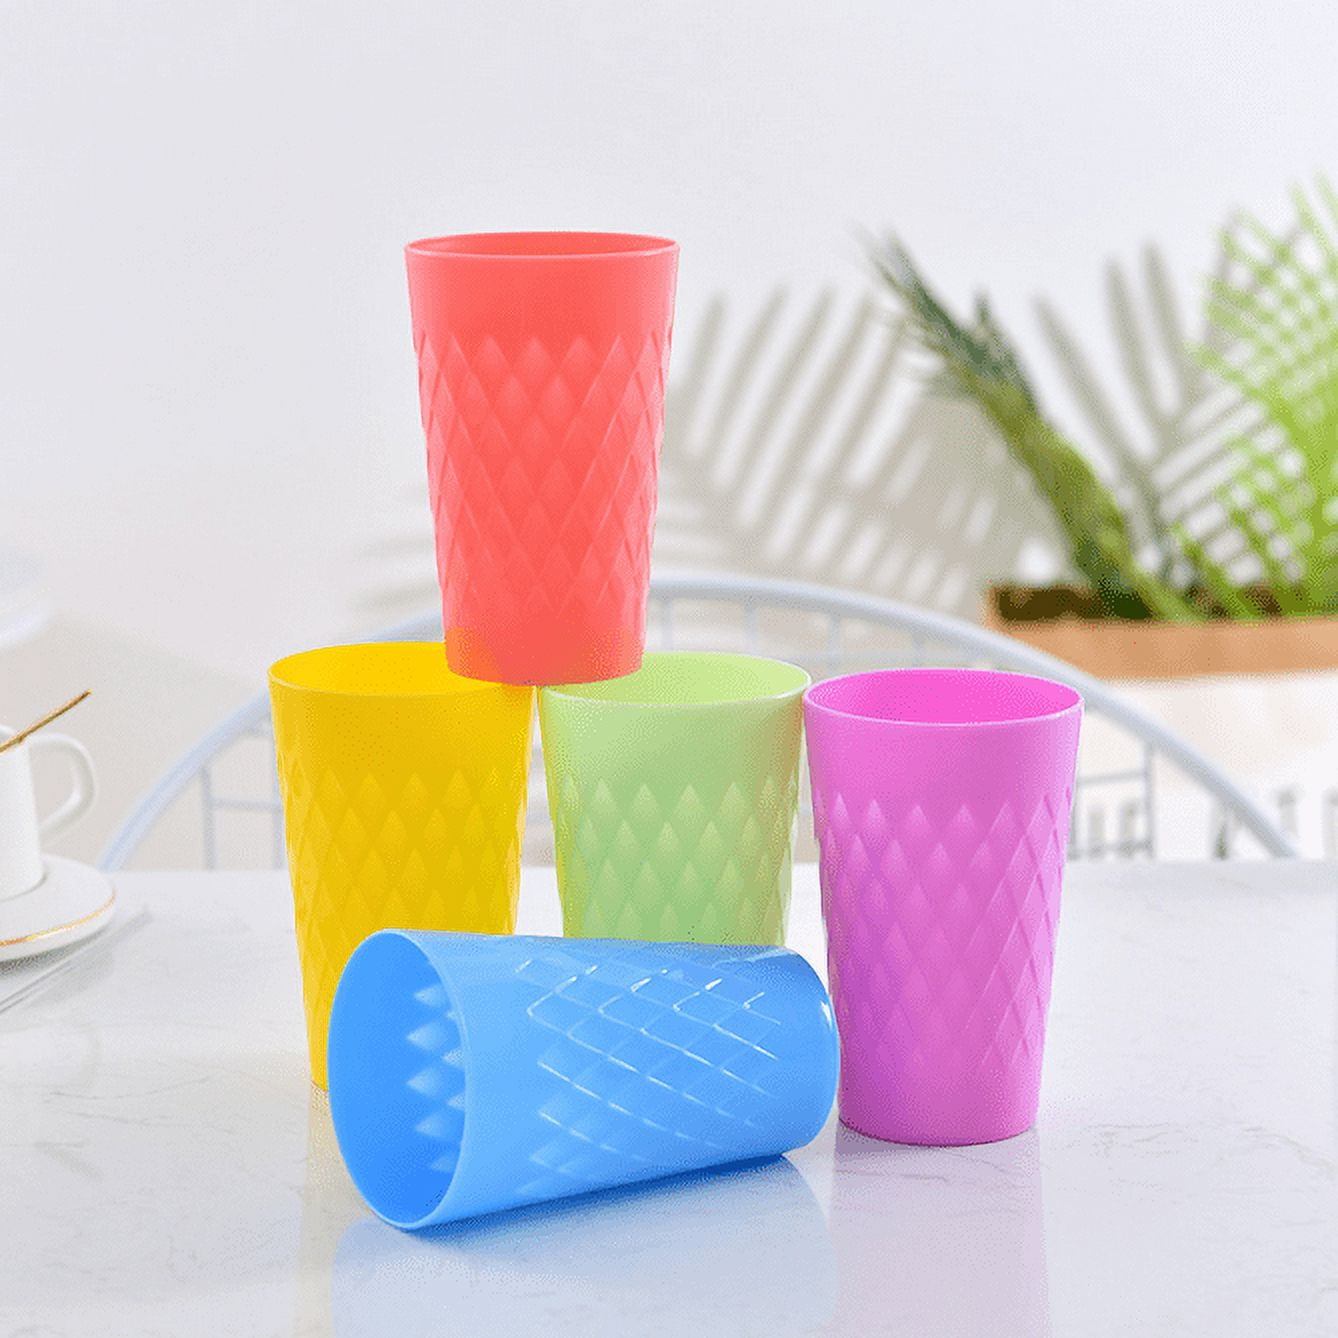 Chainplus Kids Cups - Set of 12 Reusable Plastic Cups- 9 oz Drinking Cups  for Kids - BPA Free Cups Top Rack Dishwasher Safe Cups - Assorted Colored